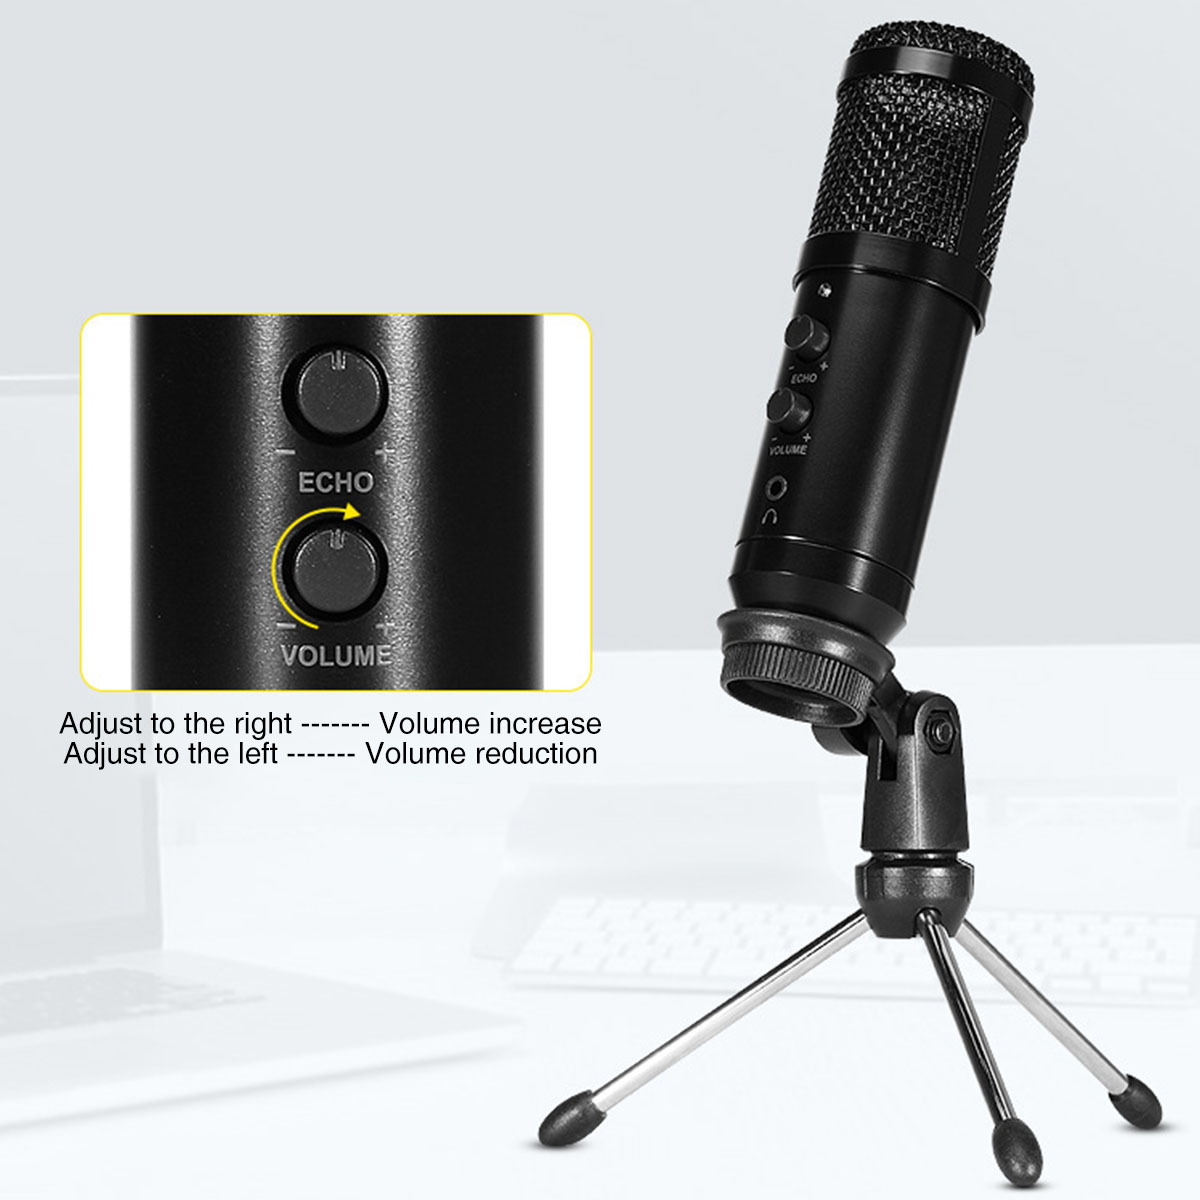 Bakeey-V9-USB-Condenser-Professional-Microphone-with-Stand-for-Computer-Recording-PC-Live-1852144-3